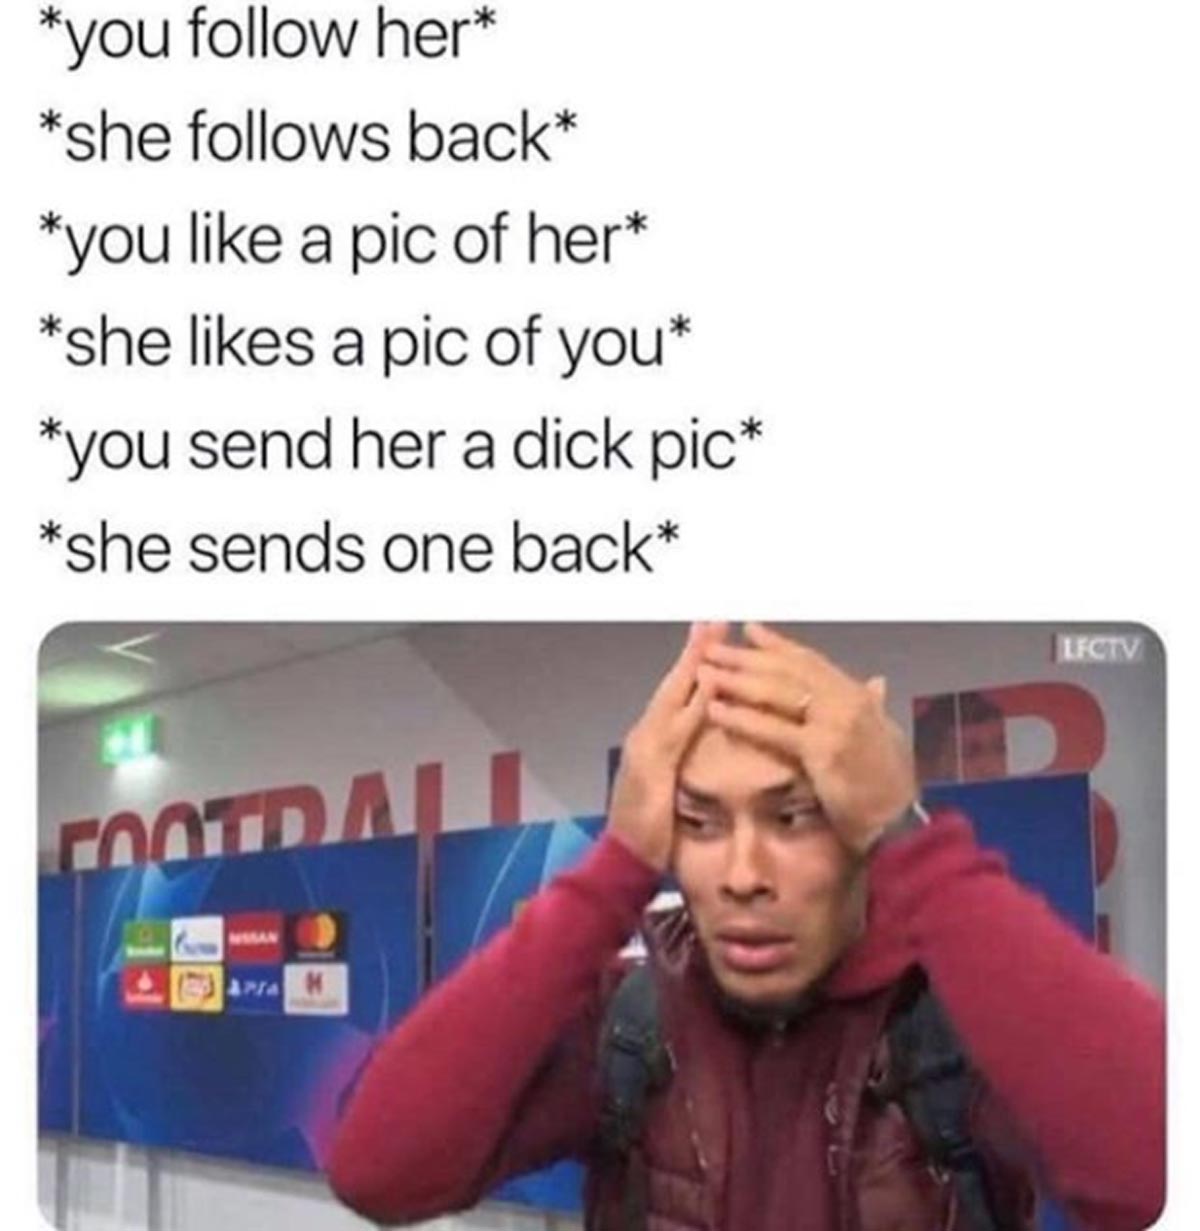 funny sex memes - trust issues meme - you her she s back you a pic of her she a pic of you you send her a dick pic she sends one back Lfctv e Moda arra